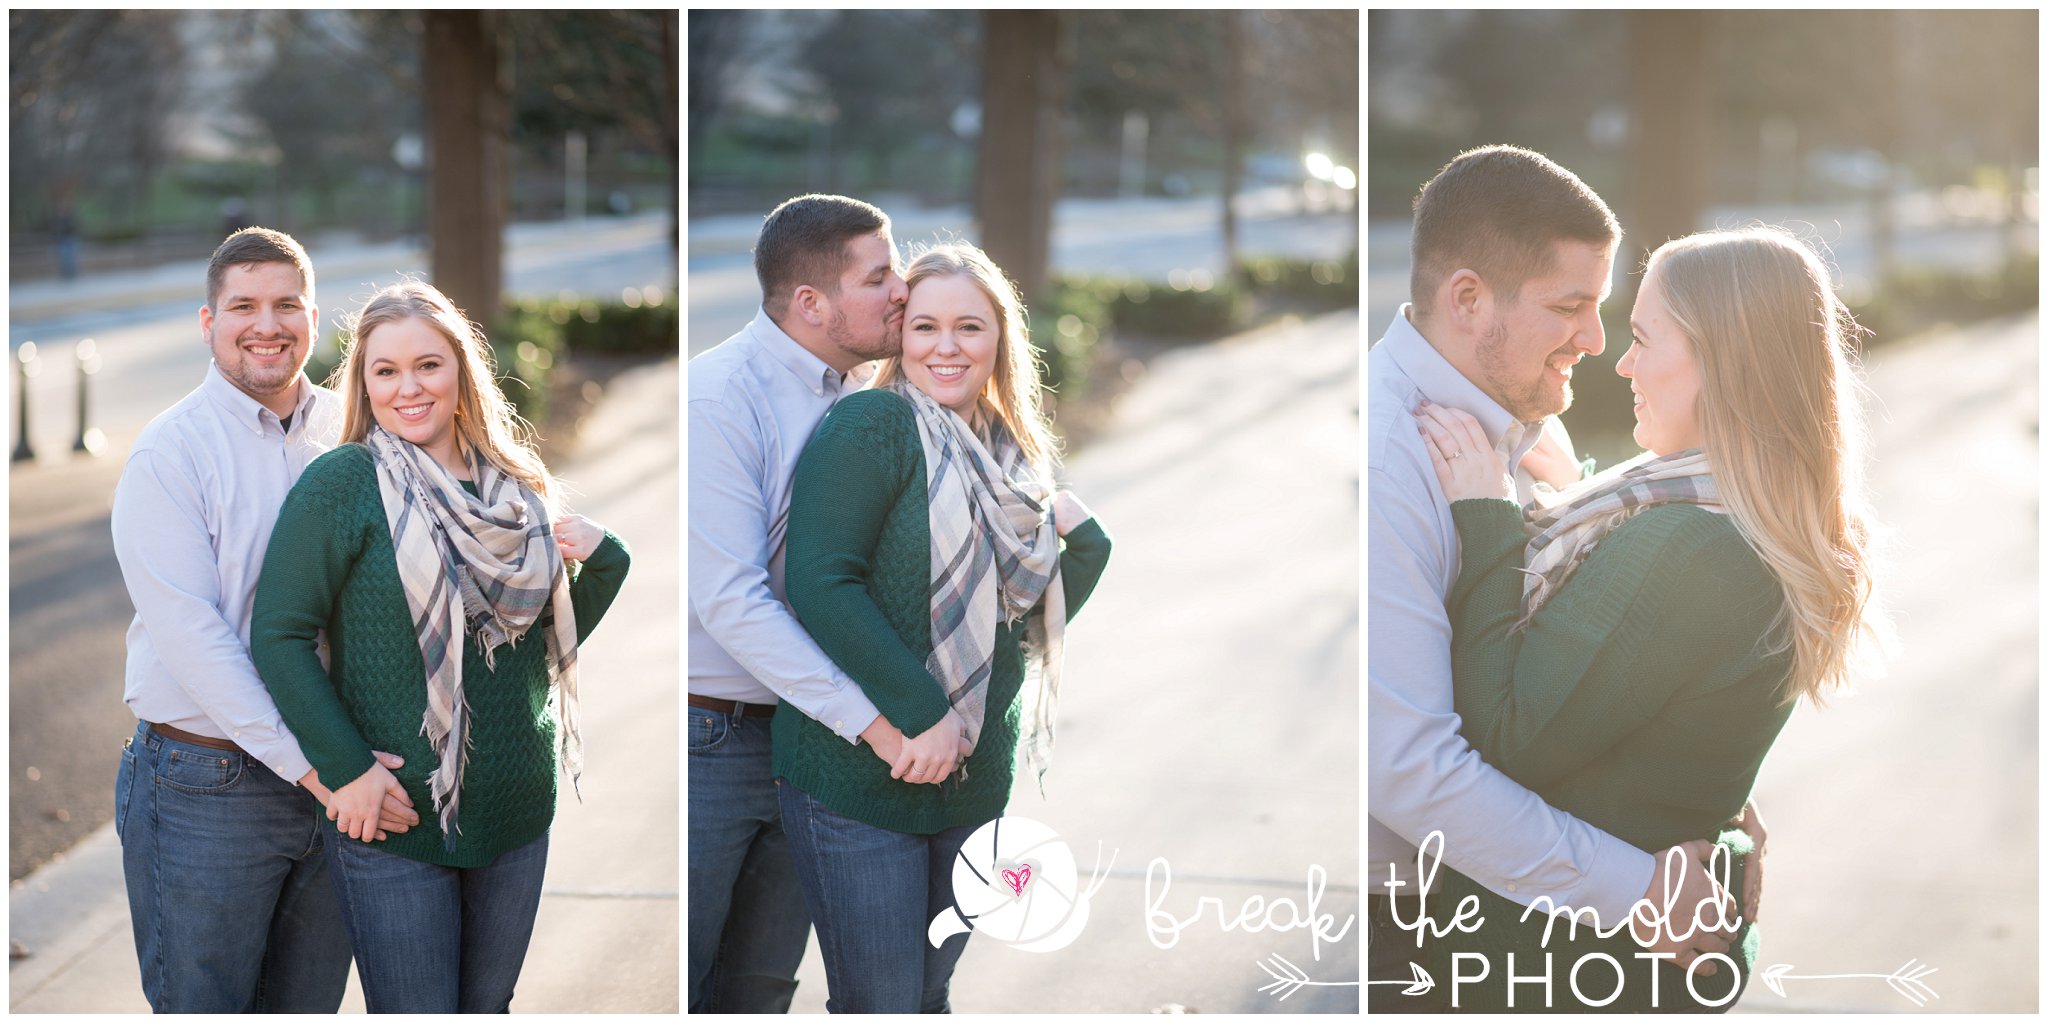 break-the-mold-photo-engagement-session-downtown-knoxville-try-before-you-buy_9873.jpg